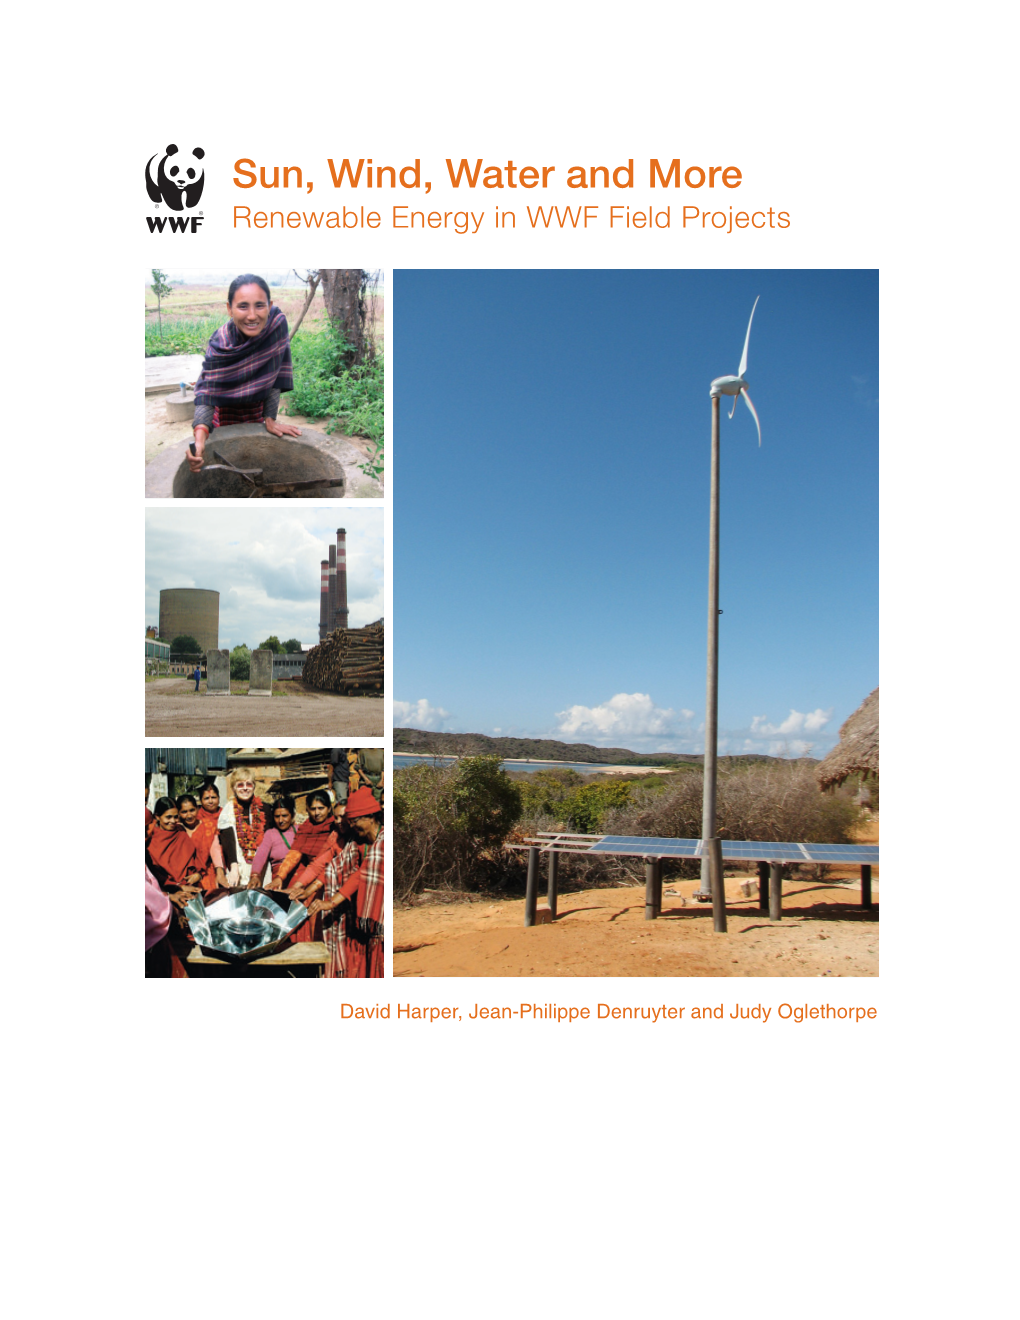 Sun, Wind, Water and More Renewable Energy in WWF Field Projects